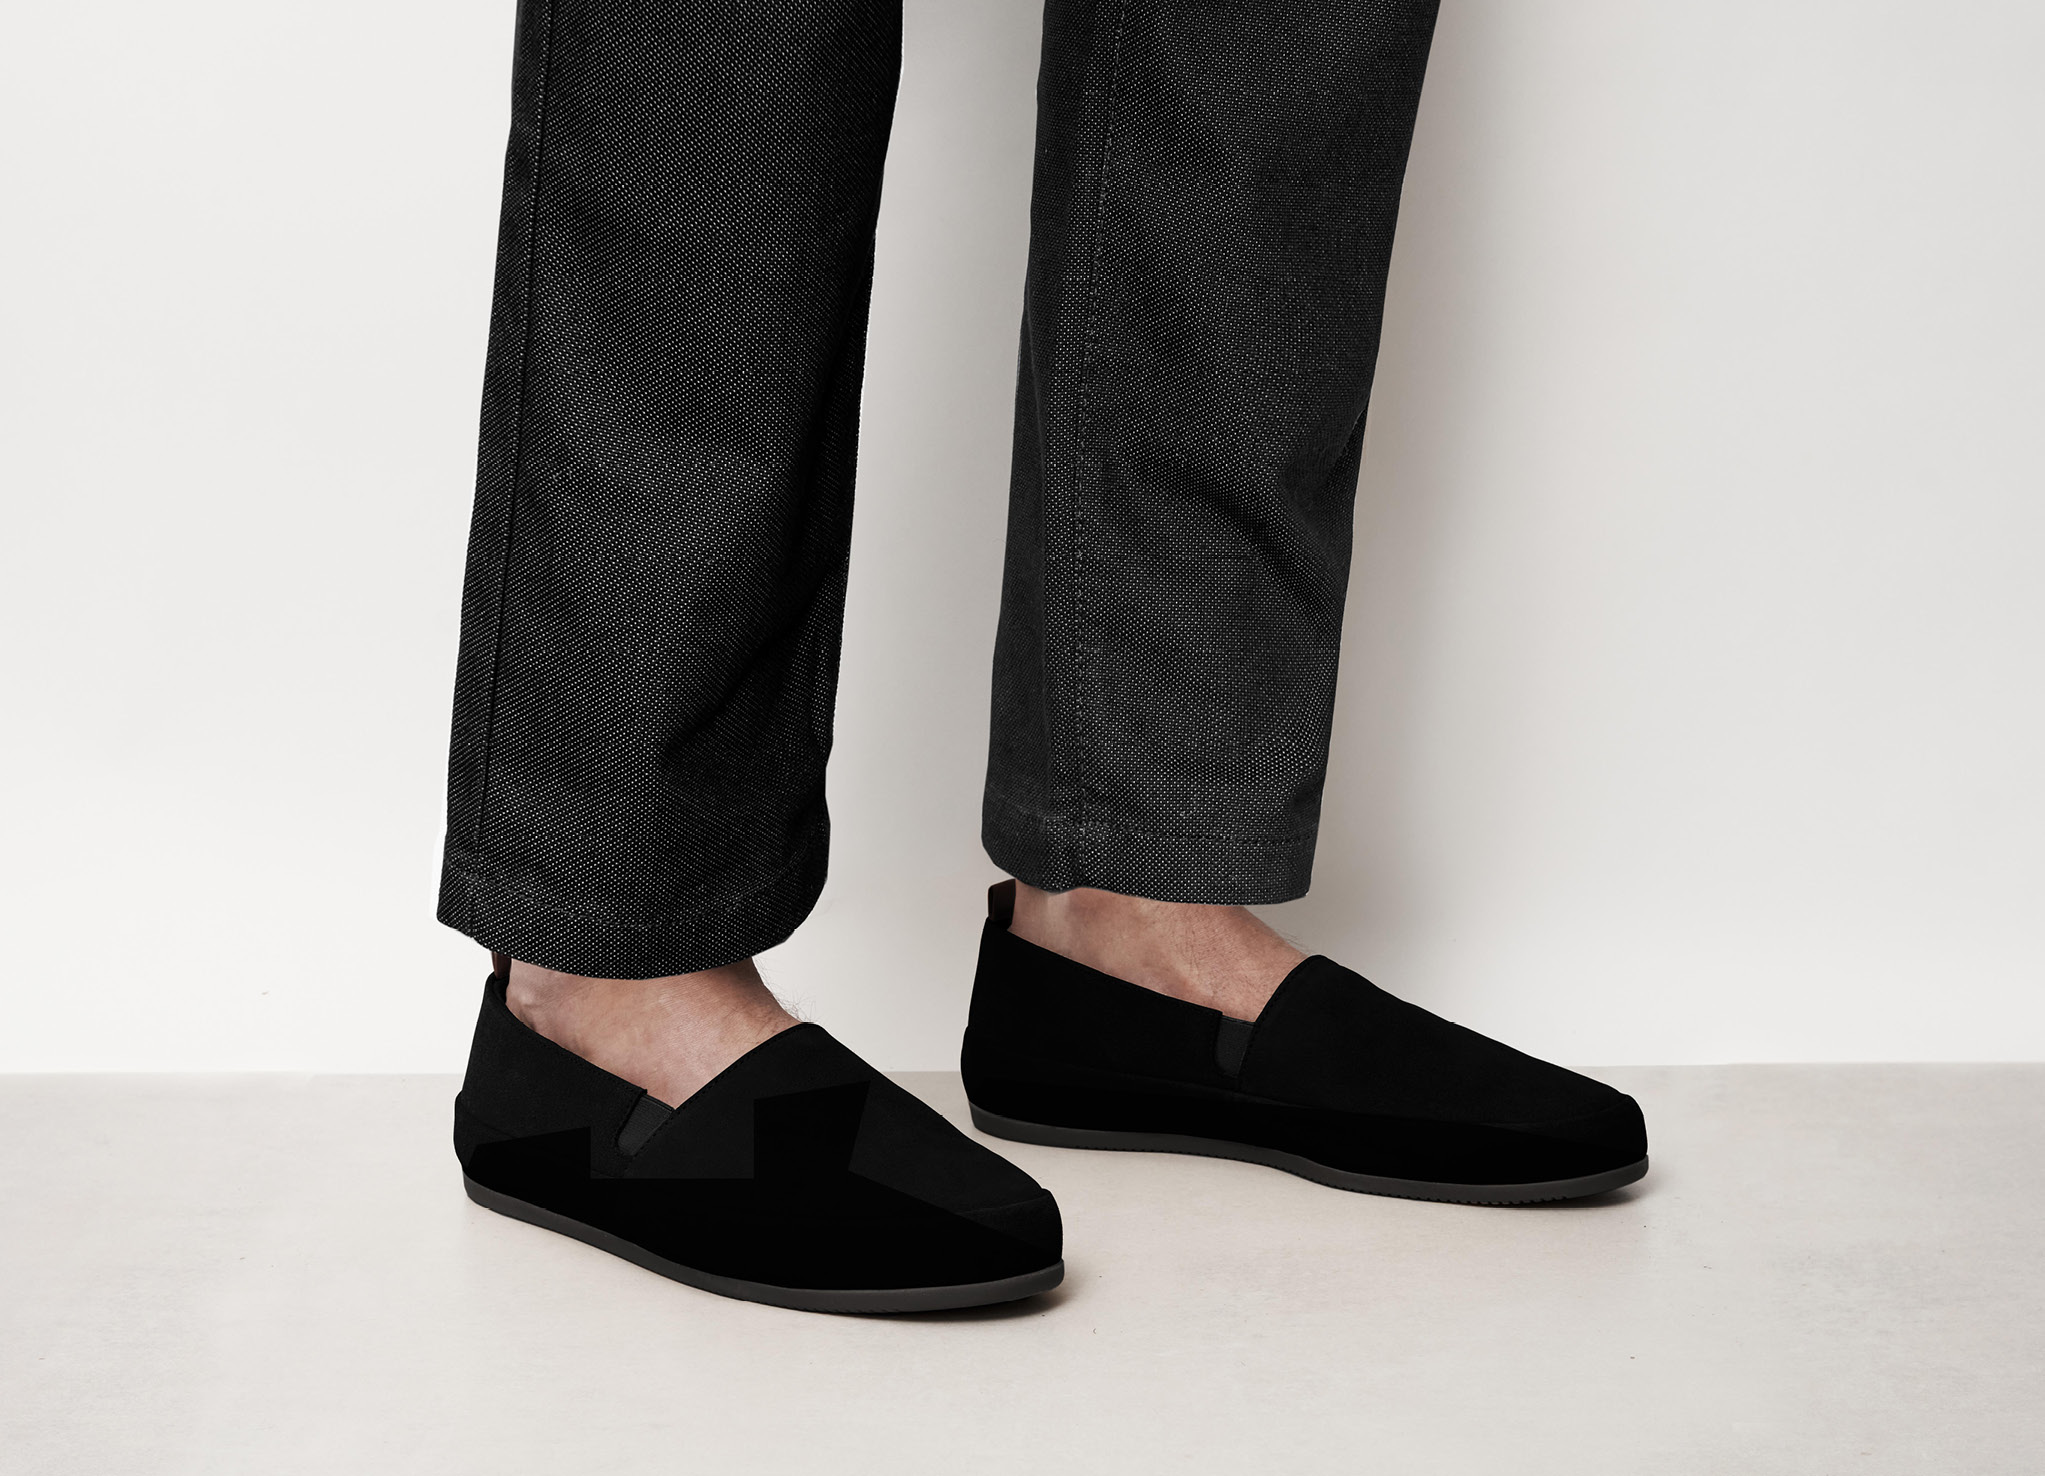 Loafer for Men | MULO shoes Luxurious Suede Leather